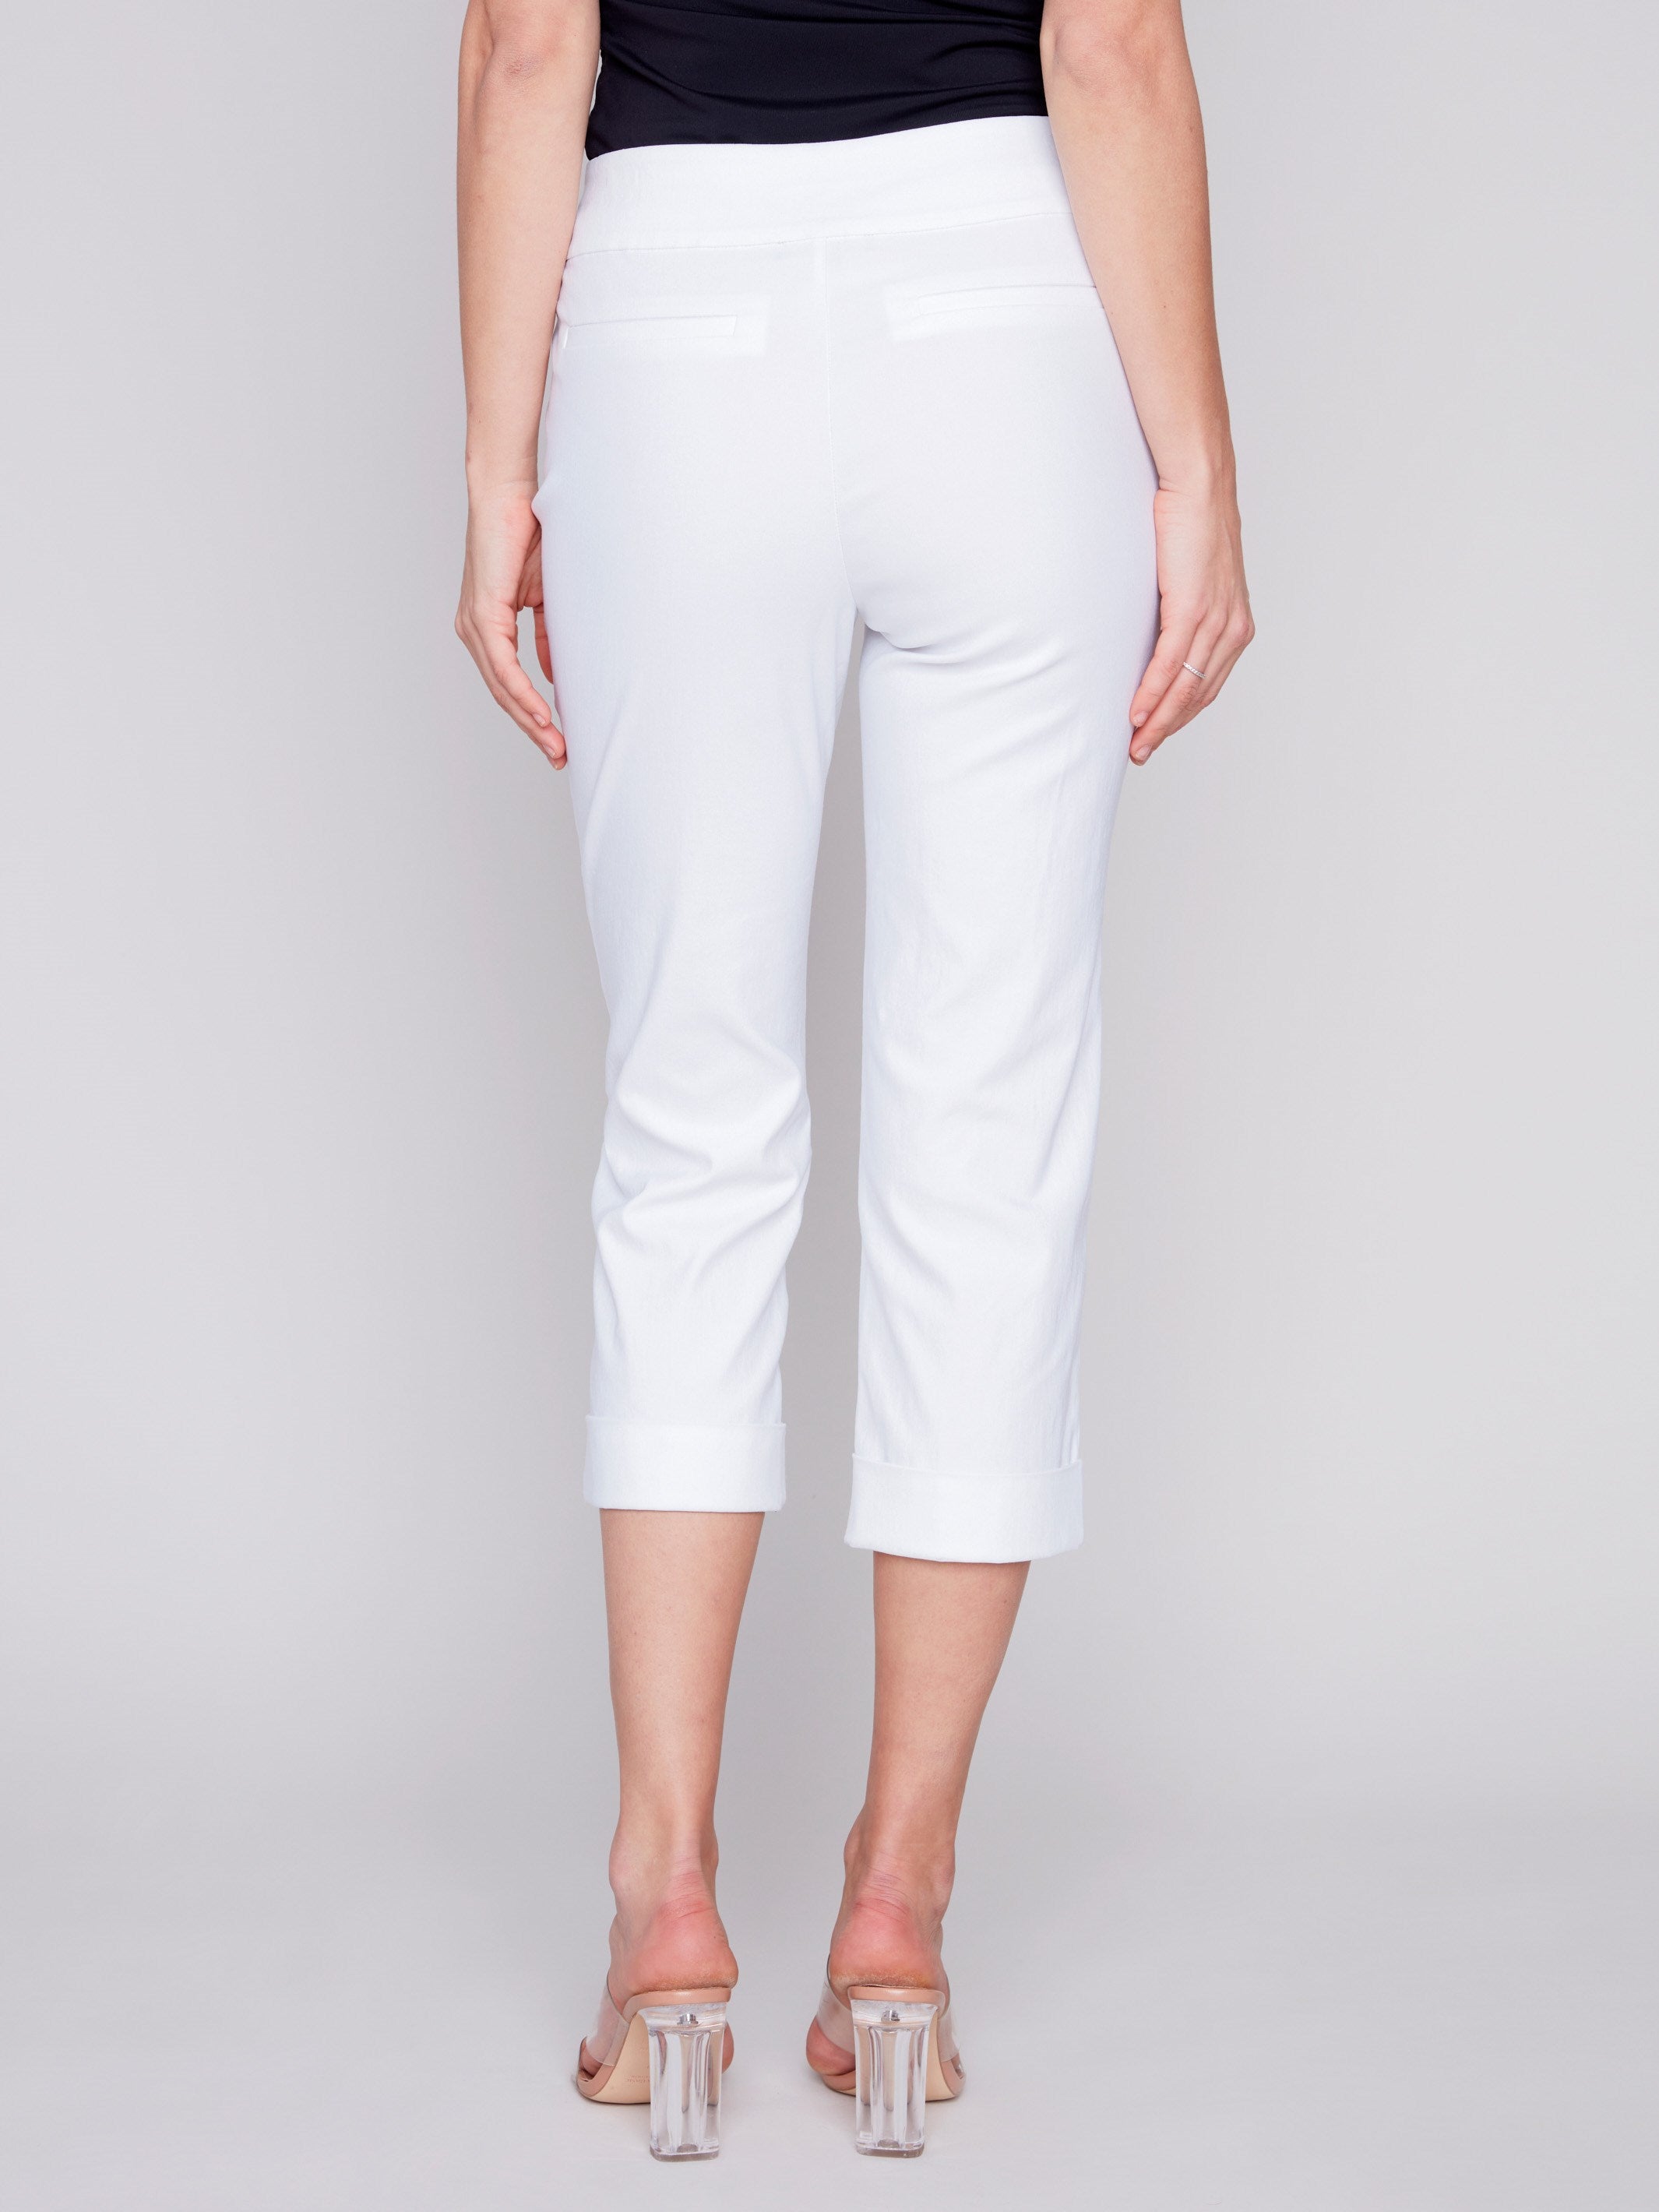 Stretch Pull-On Capri Pants - White - Charlie B Collection Canada - Image 3